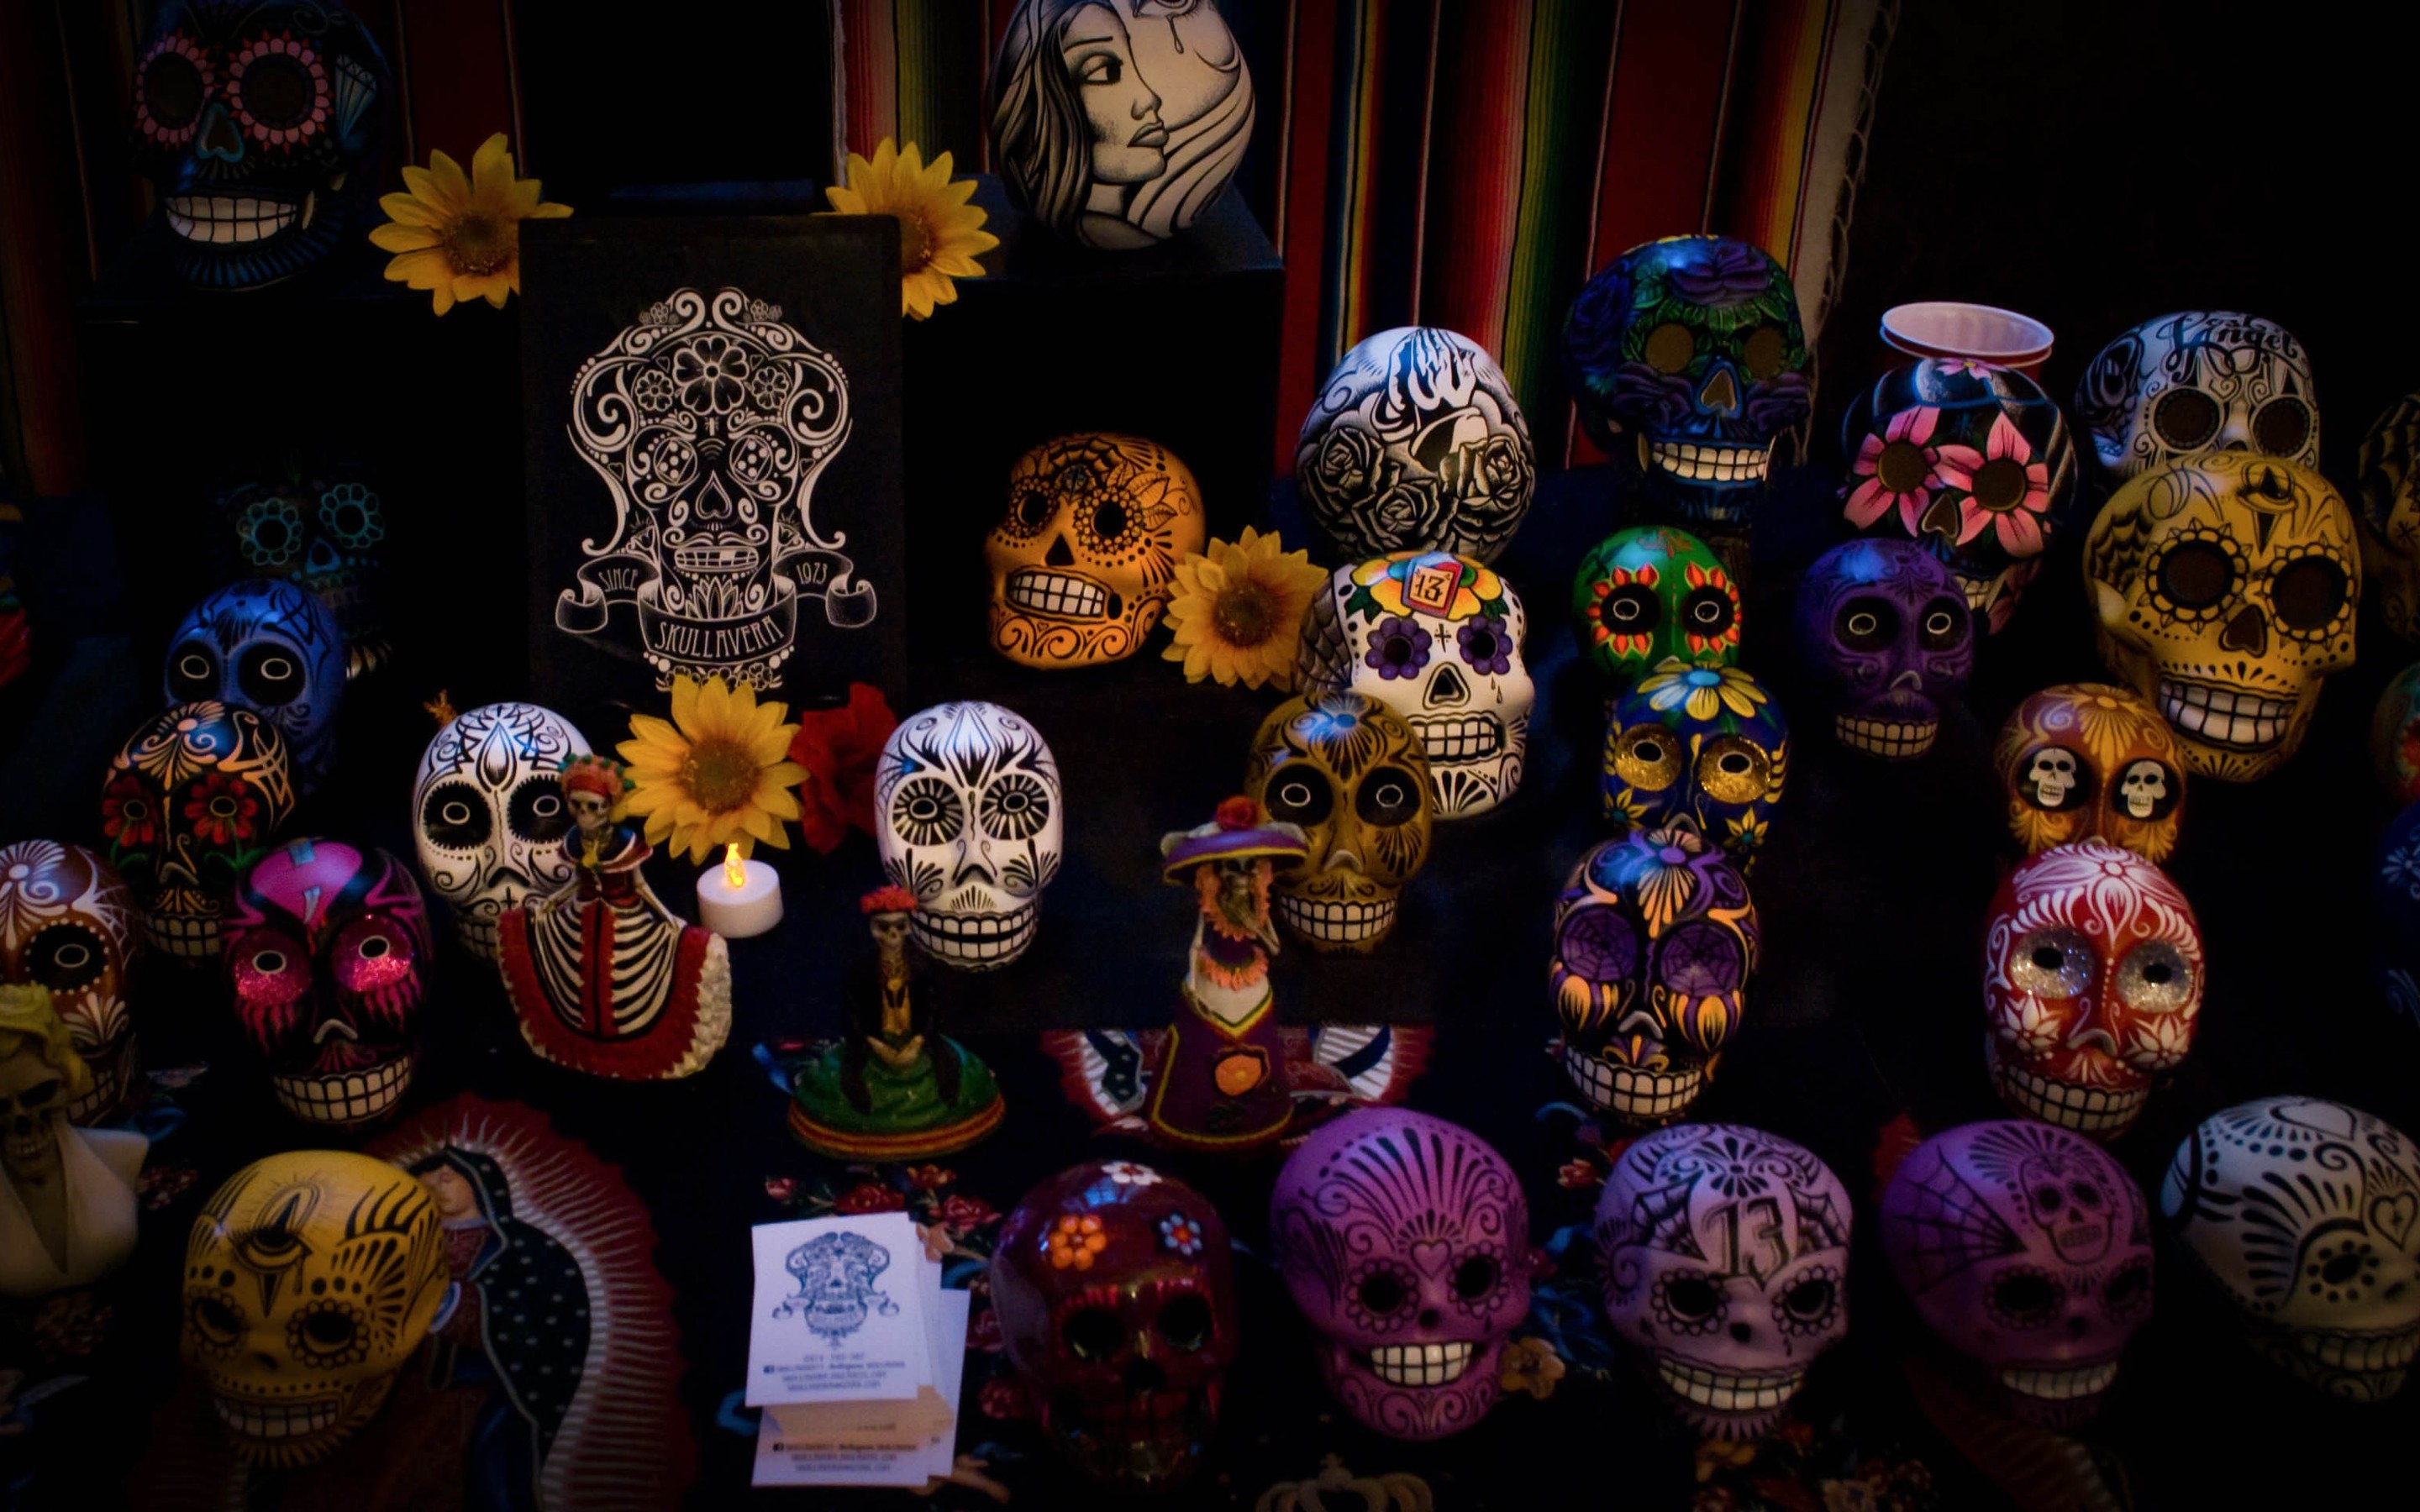 2880x1800 Day of the Dead for 2880 x 1800 Retina Display resolution